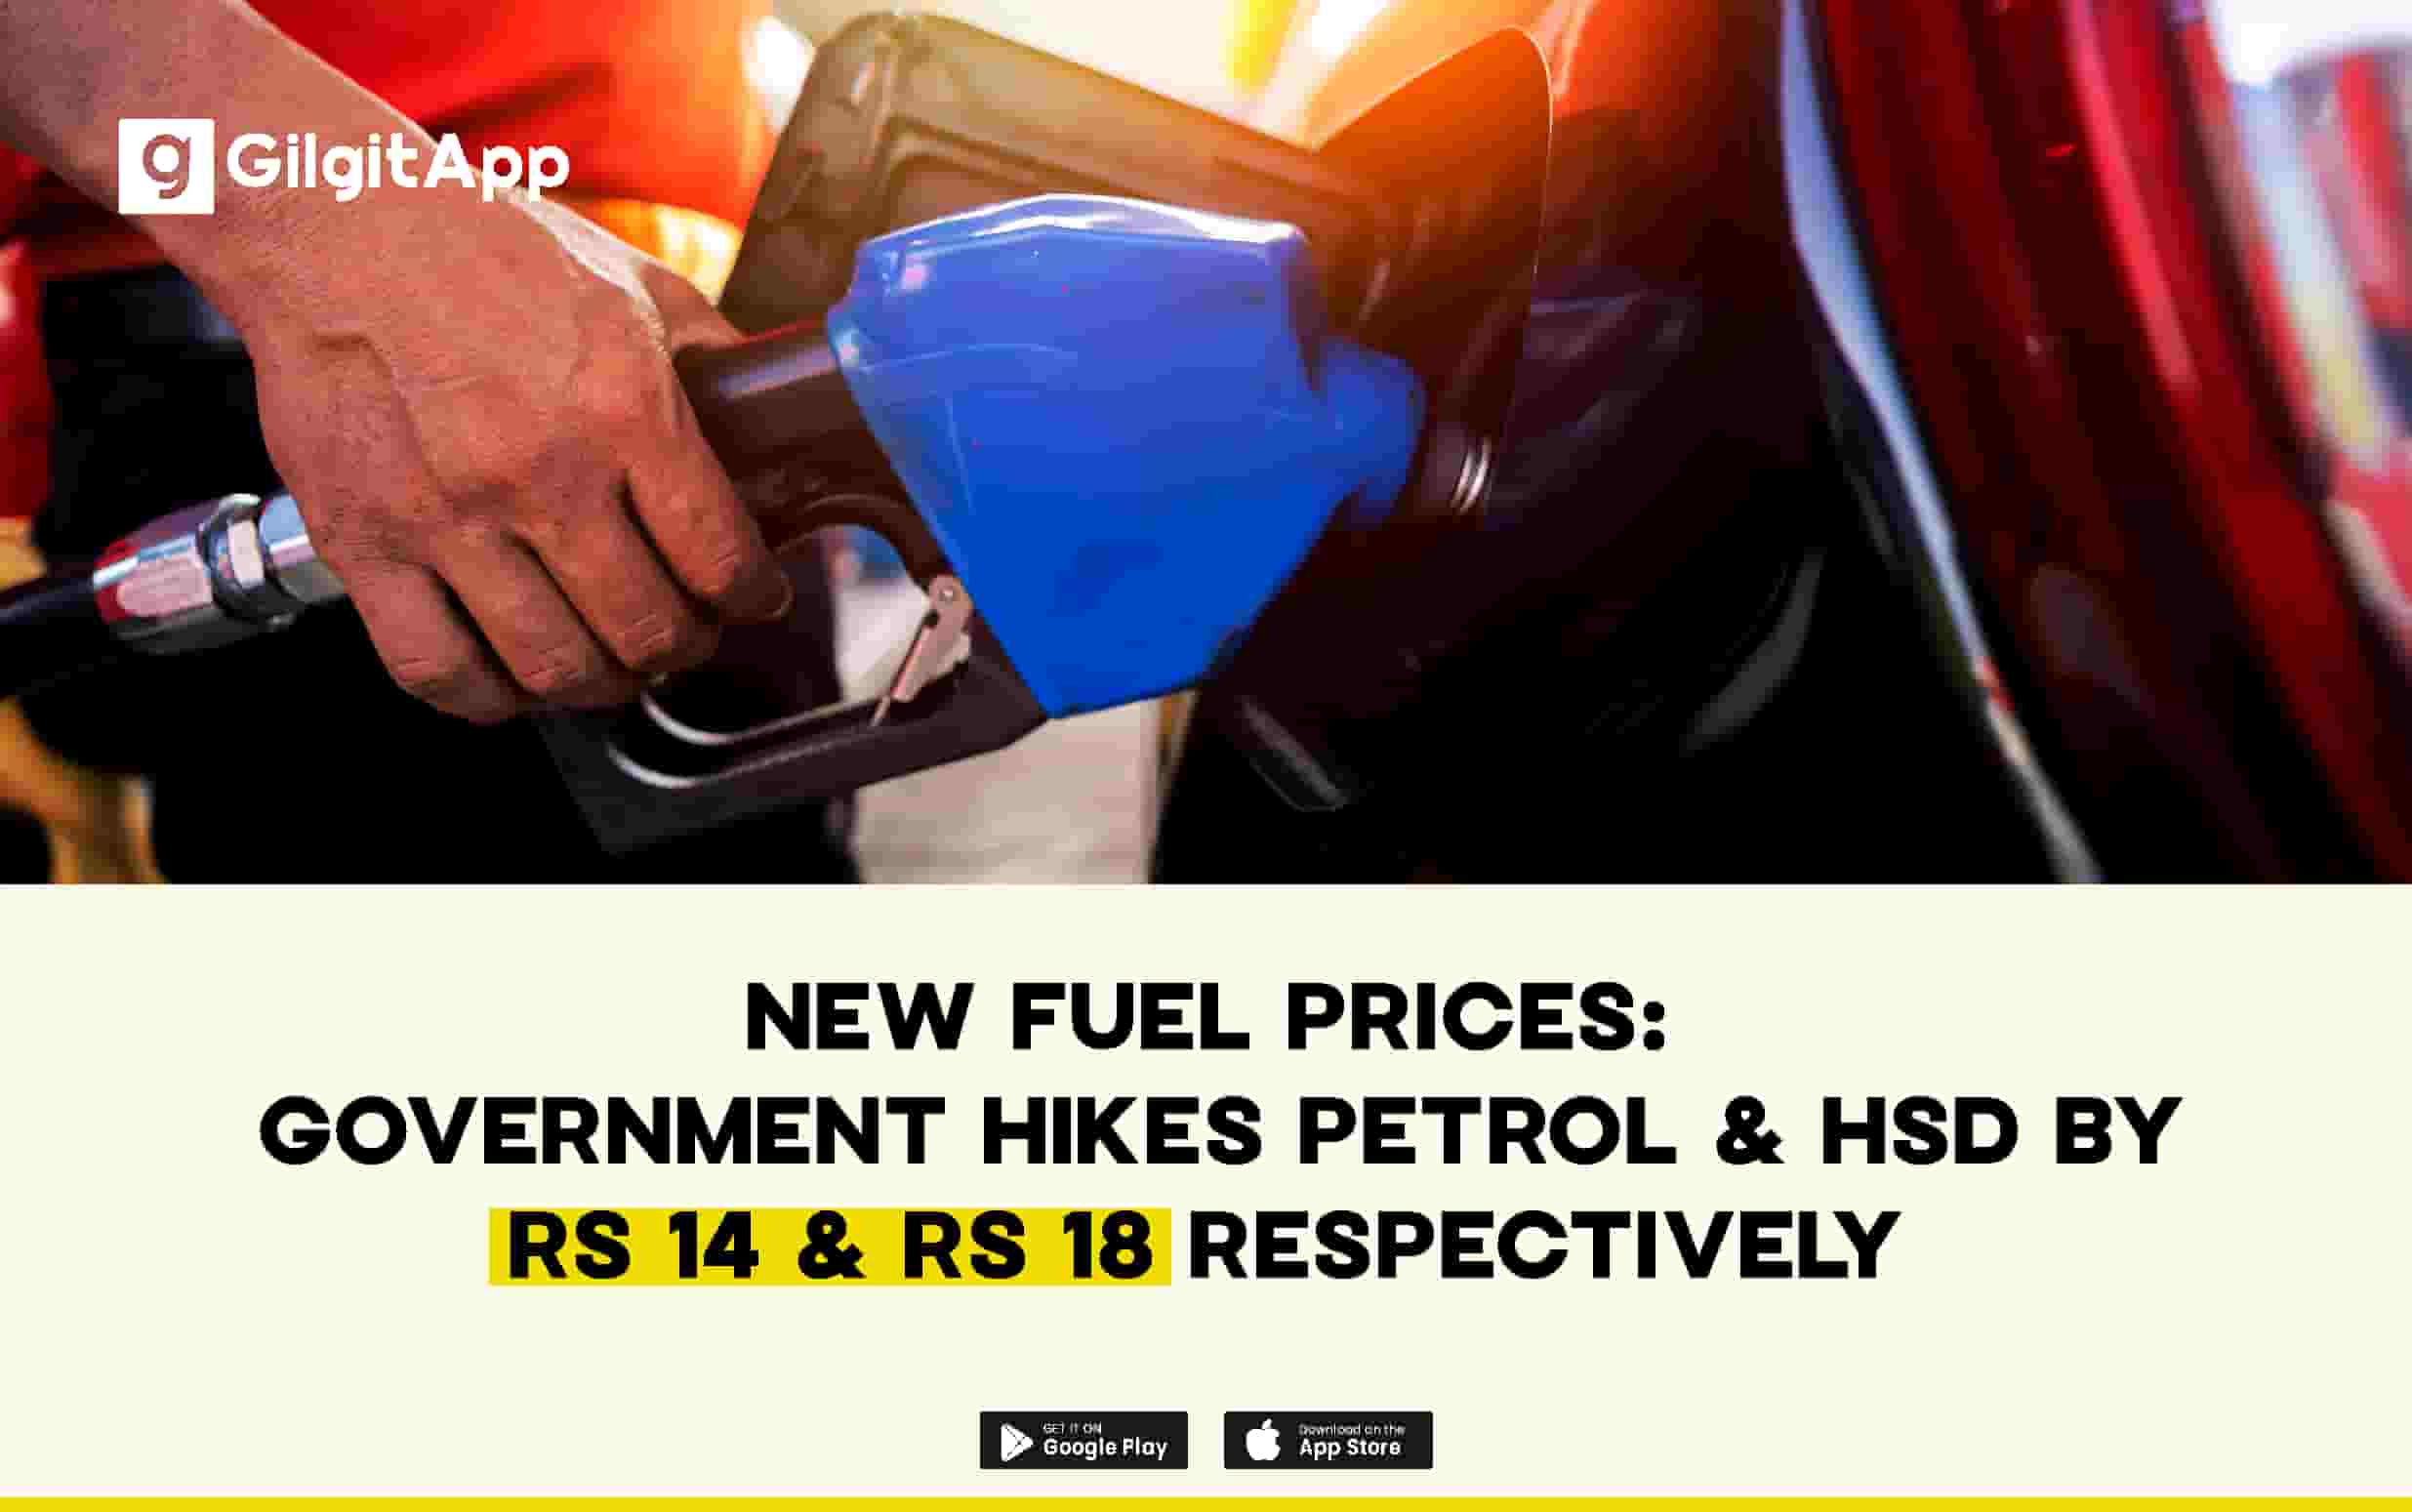 Government Hikes Petrol & HSD Price by Rs 14 &  Rs 18 Respectively